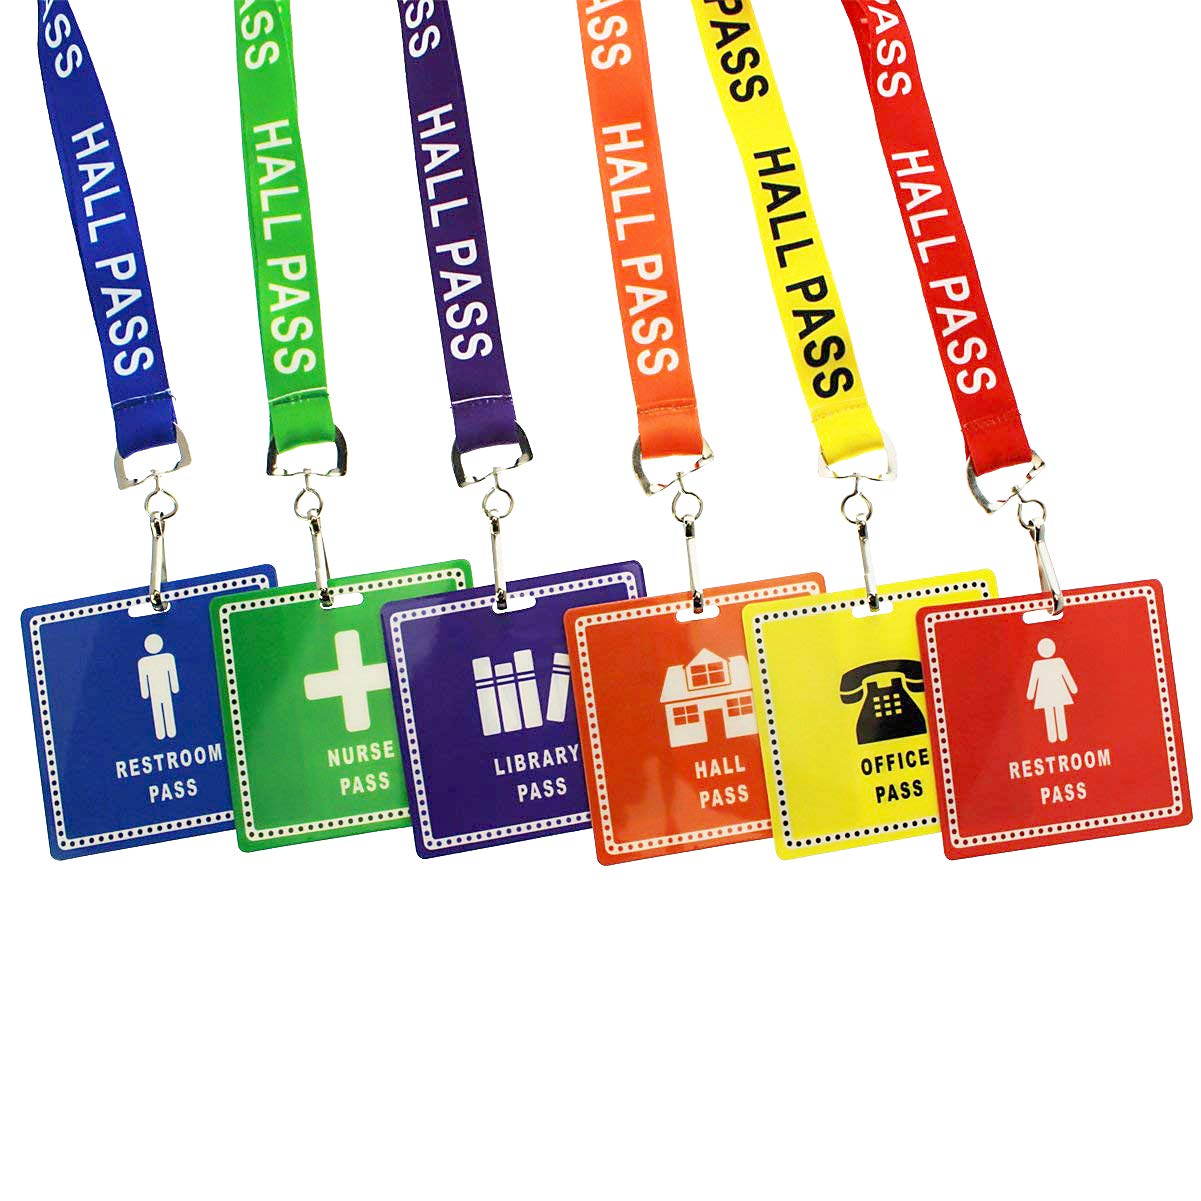 Mua 6 Pack - Student Hall Pass Lanyards with Unbreakable Card Passes &  Safety Breakaway Lanyards (Hall, Bathroom, Library, Office & Nurse) -  Classroom/School Supplies for Teachers by Specialist ID trên Amazon